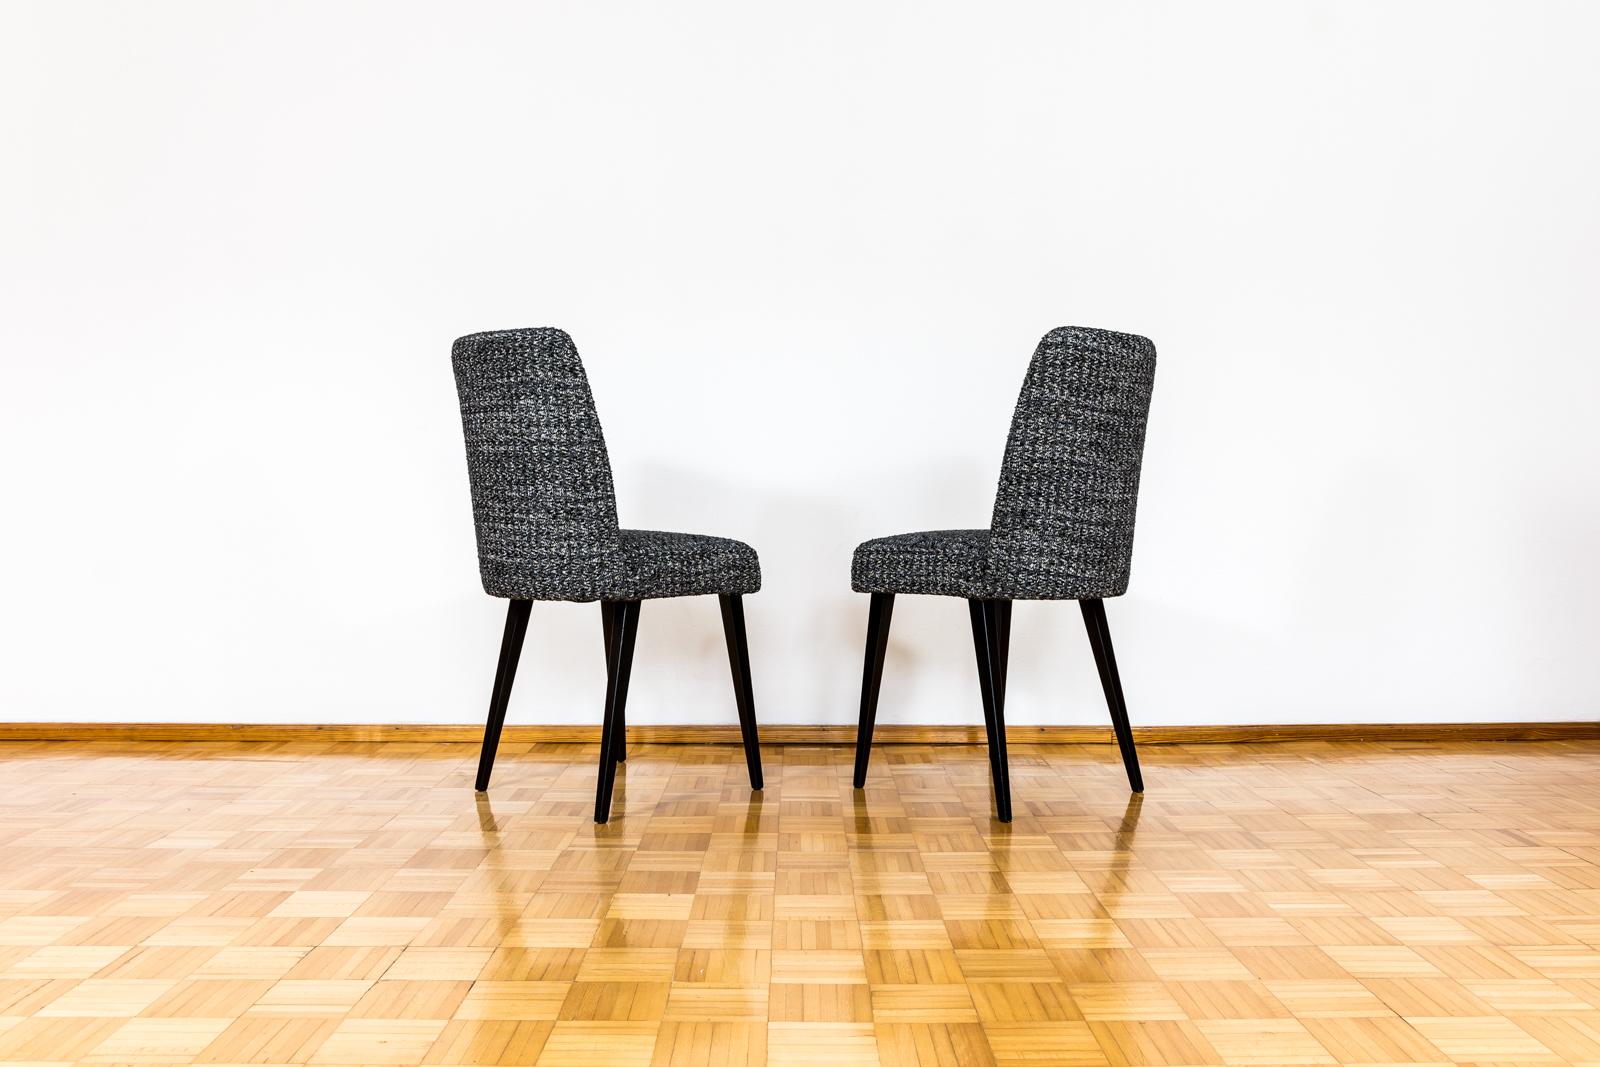 20th Century Set Of 6 Black Chairs, 1960s, Poland For Sale